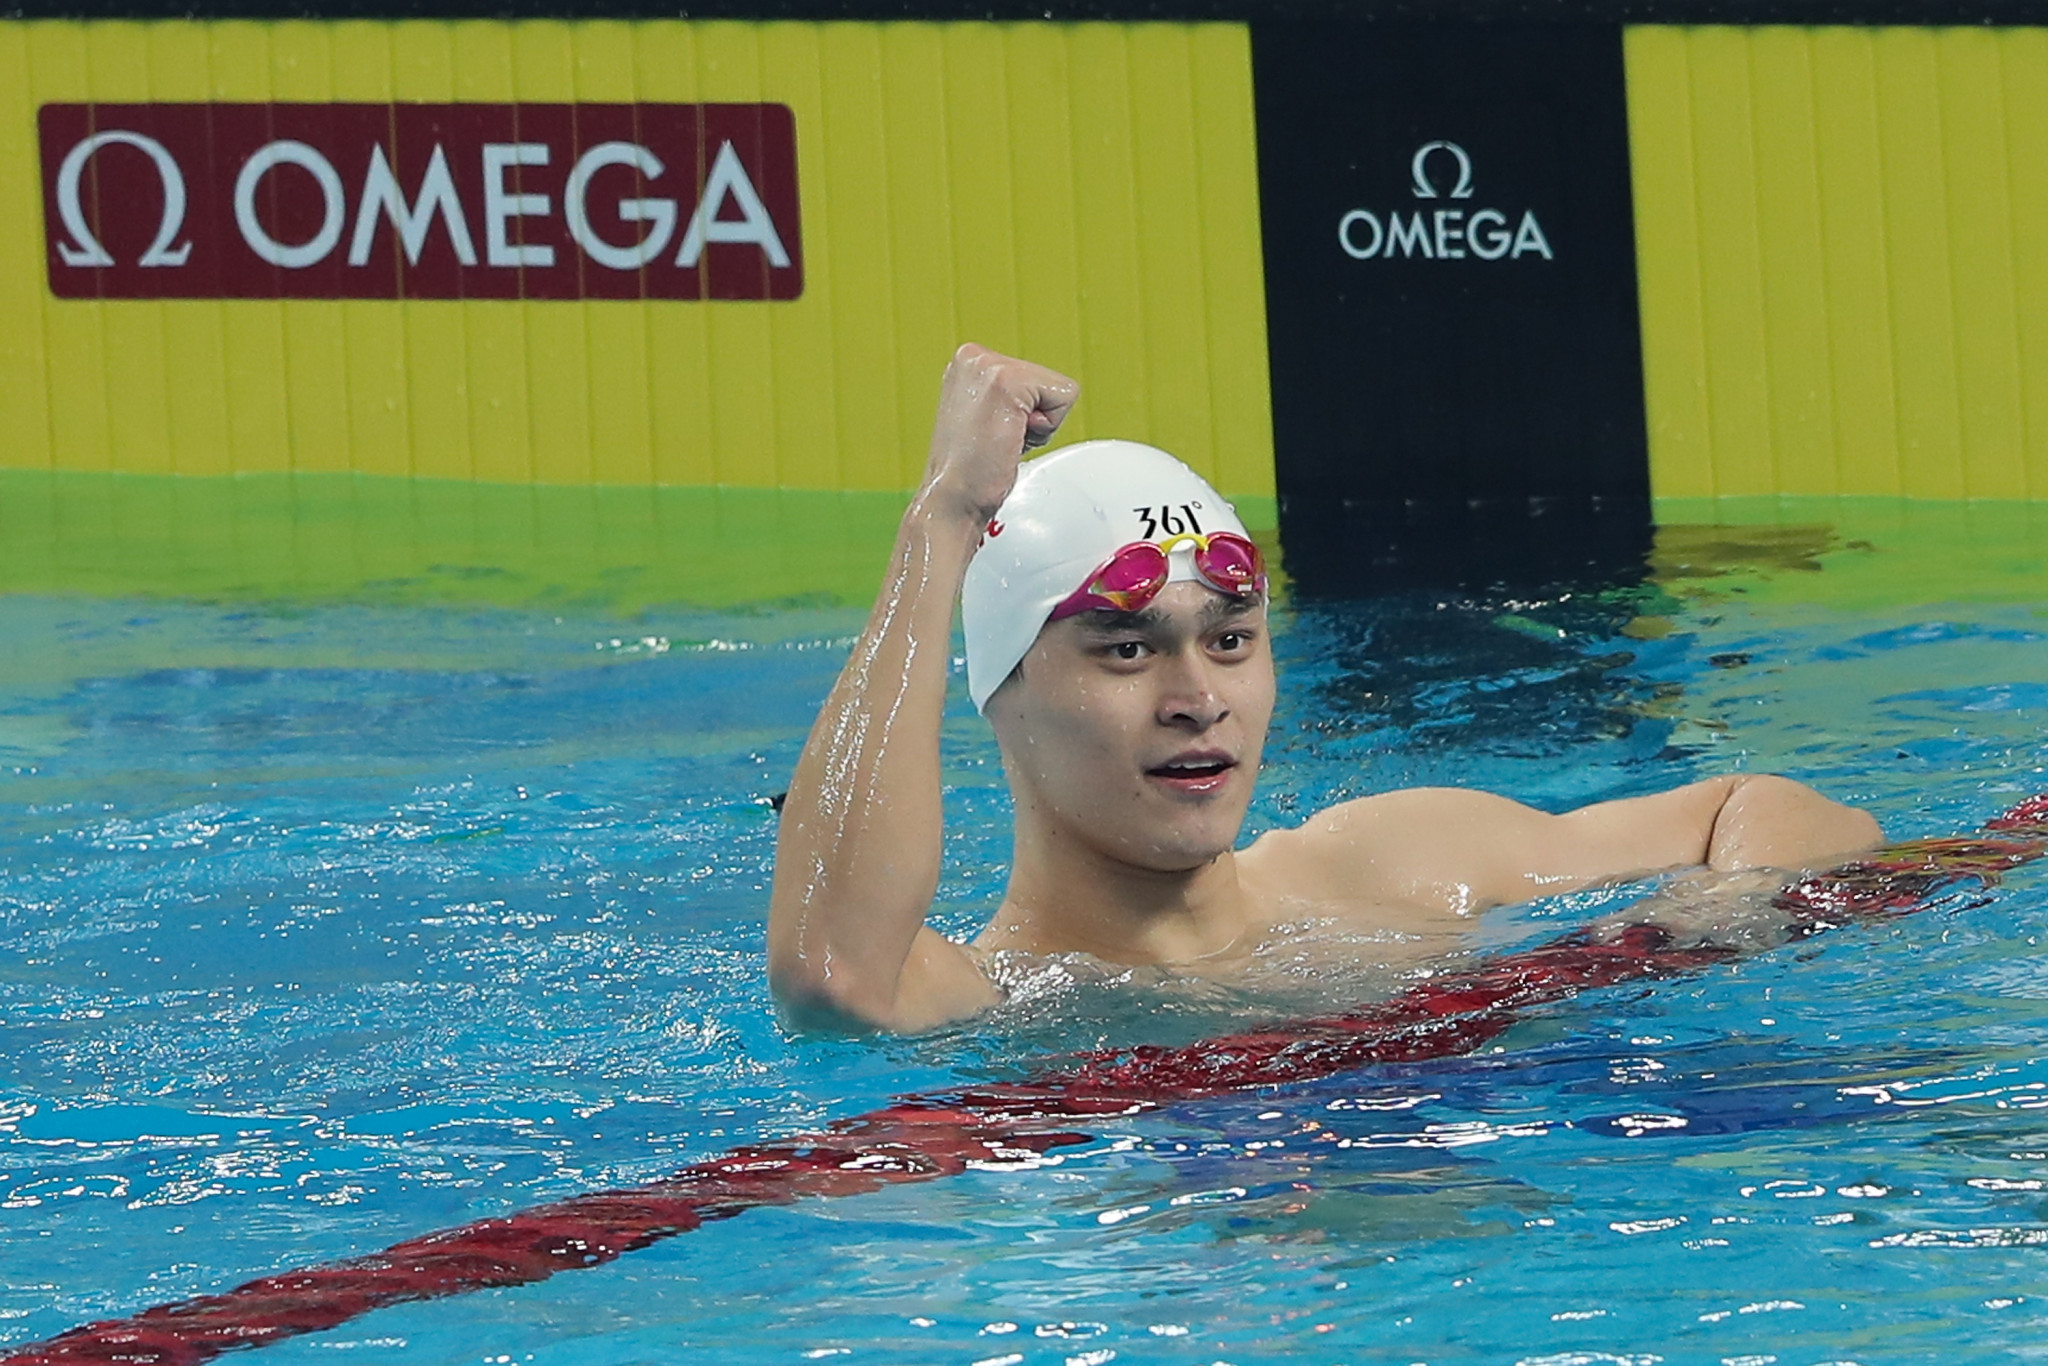 Sun Yang's second CAS hearing is scheduled for next month ©Getty Images